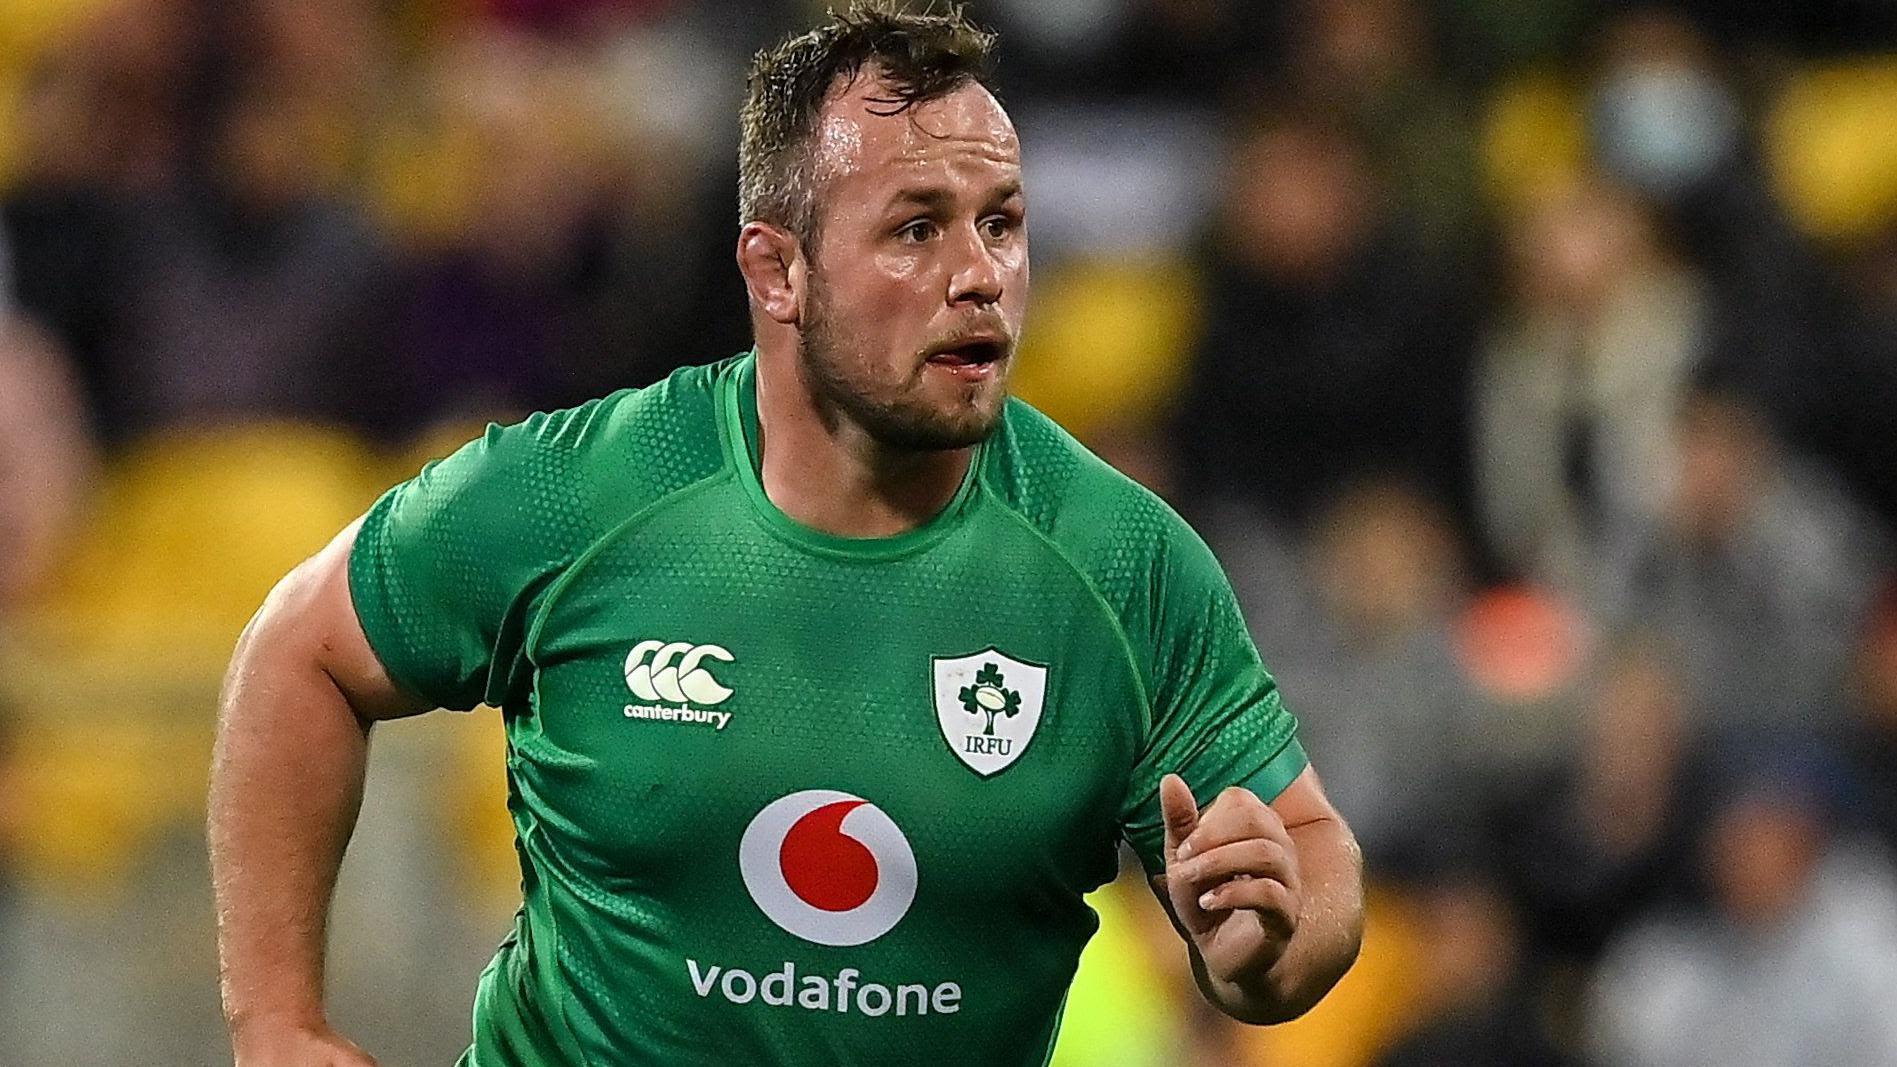 Ireland prop Byrne joins Cardiff from Leinster